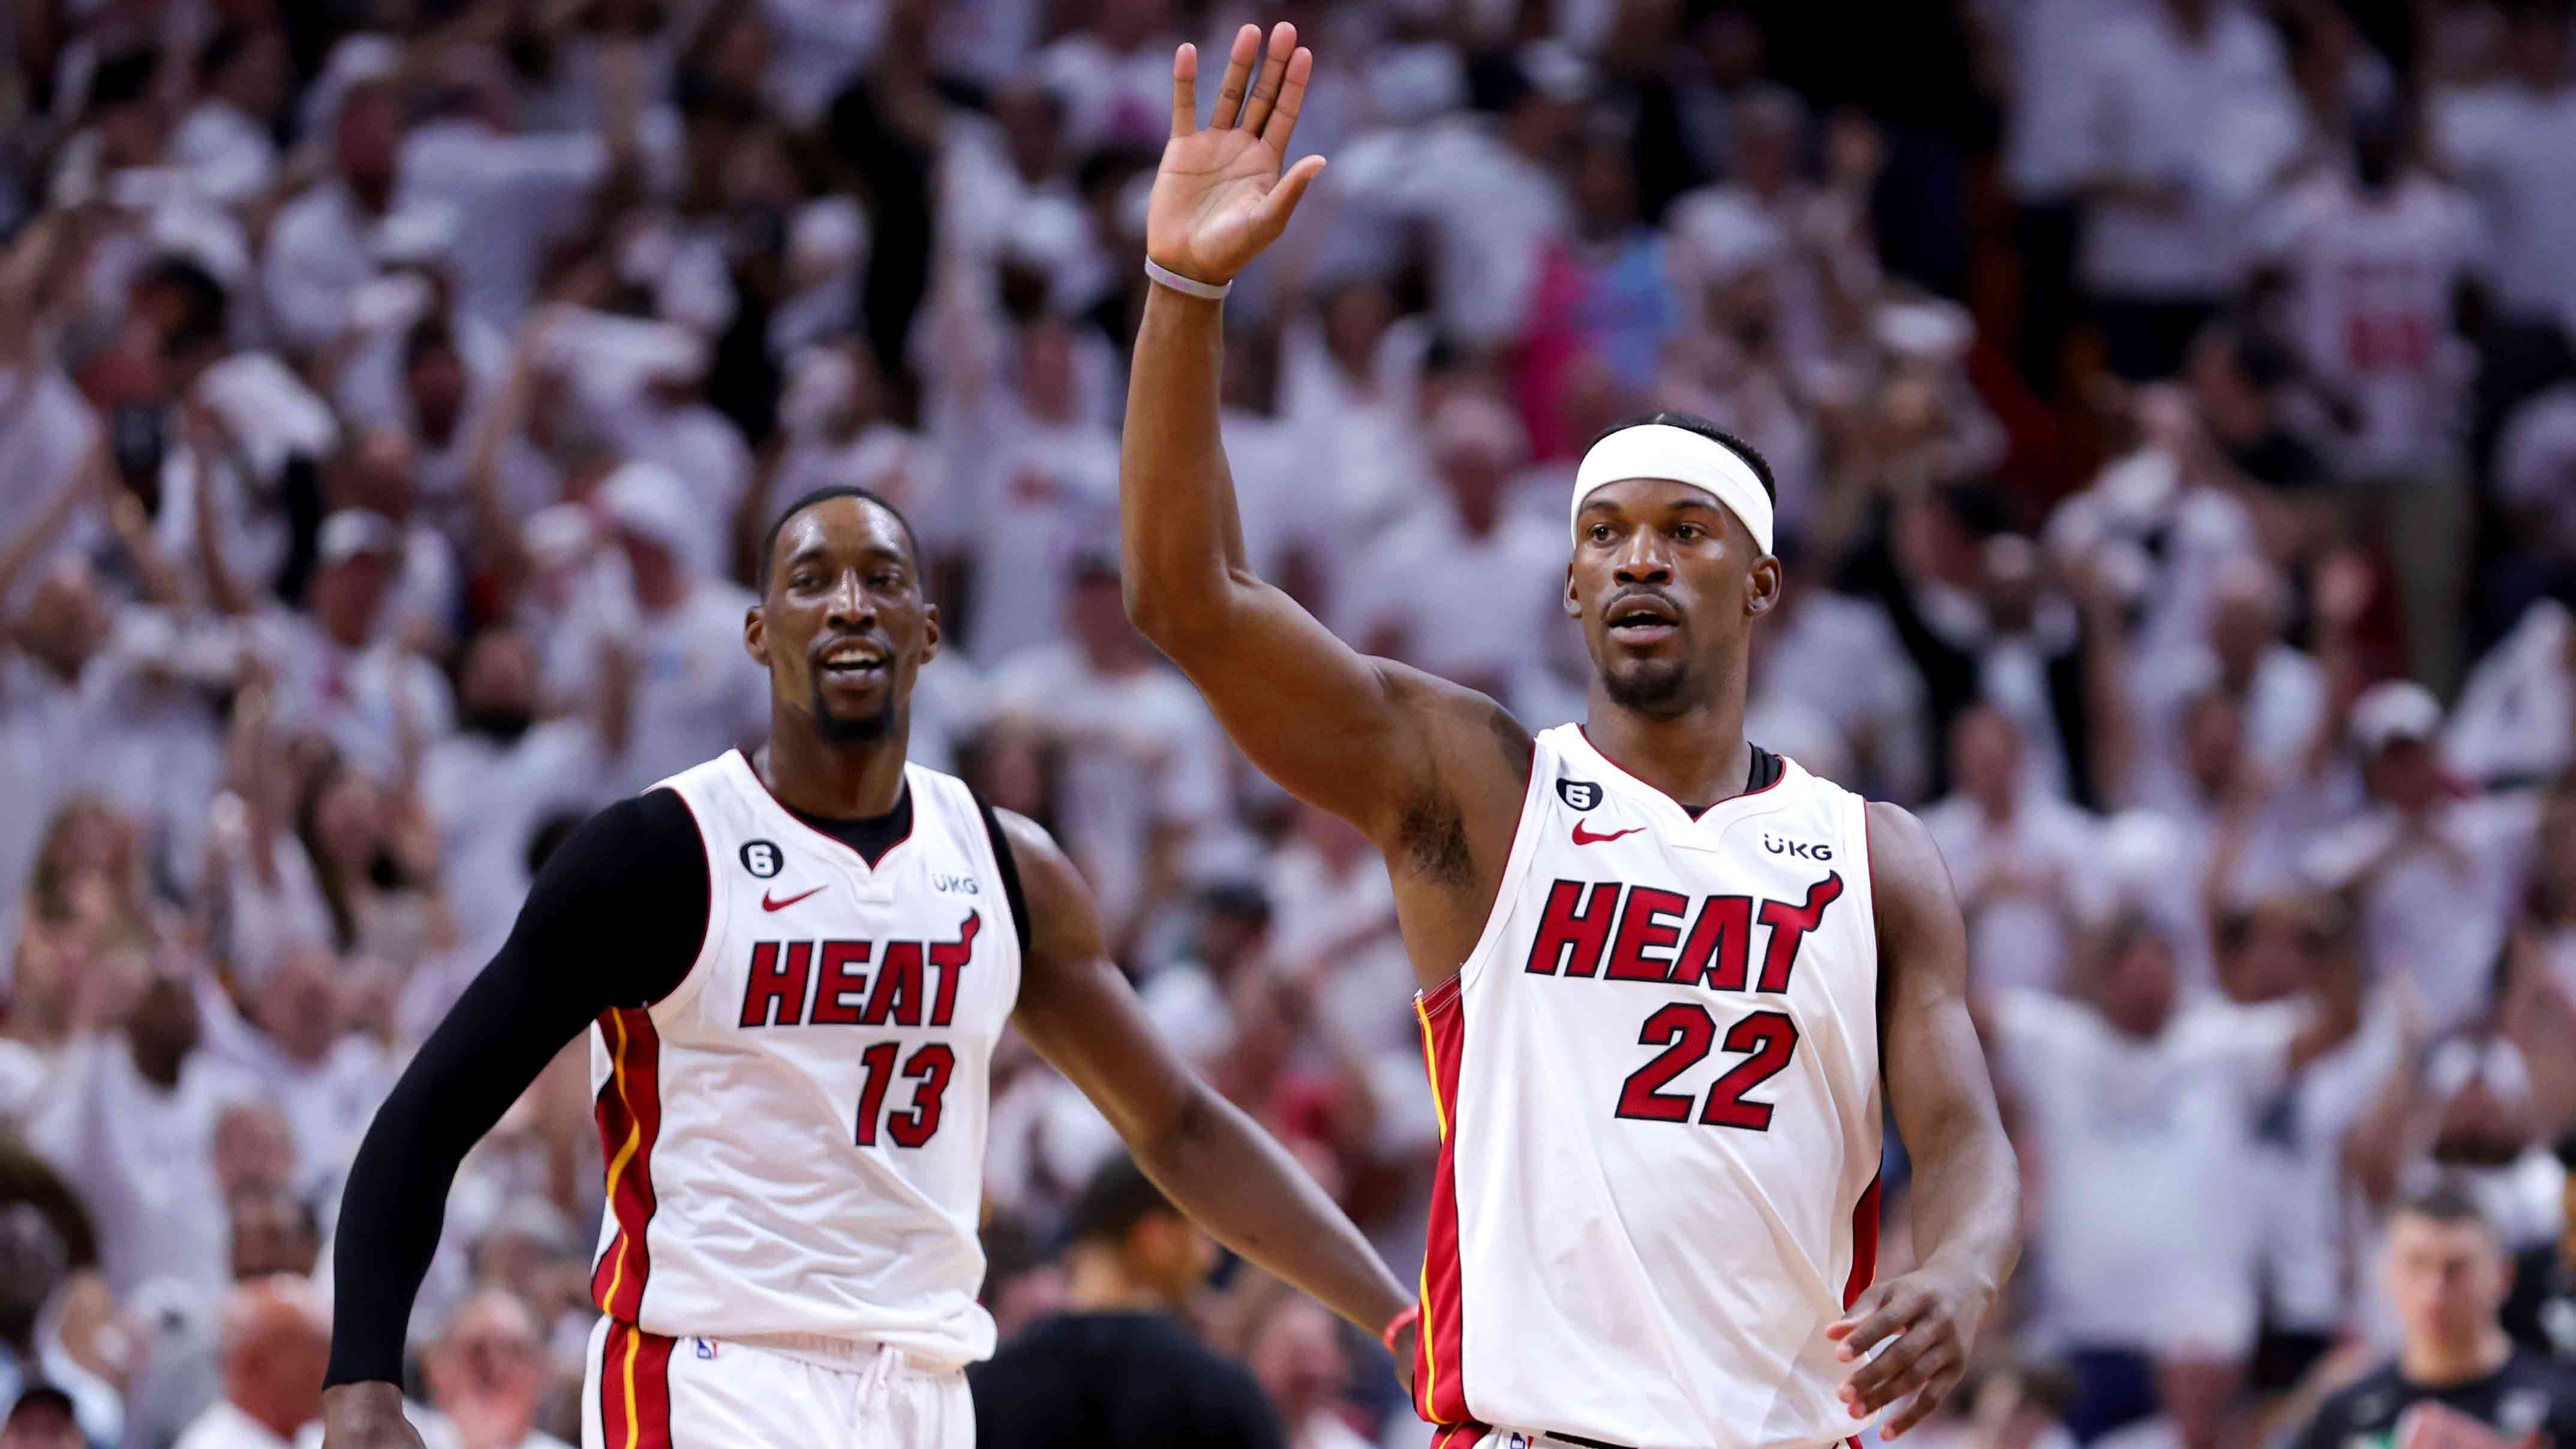 NBA Finals: Momentum of 3-point shooting swung the Heat's way